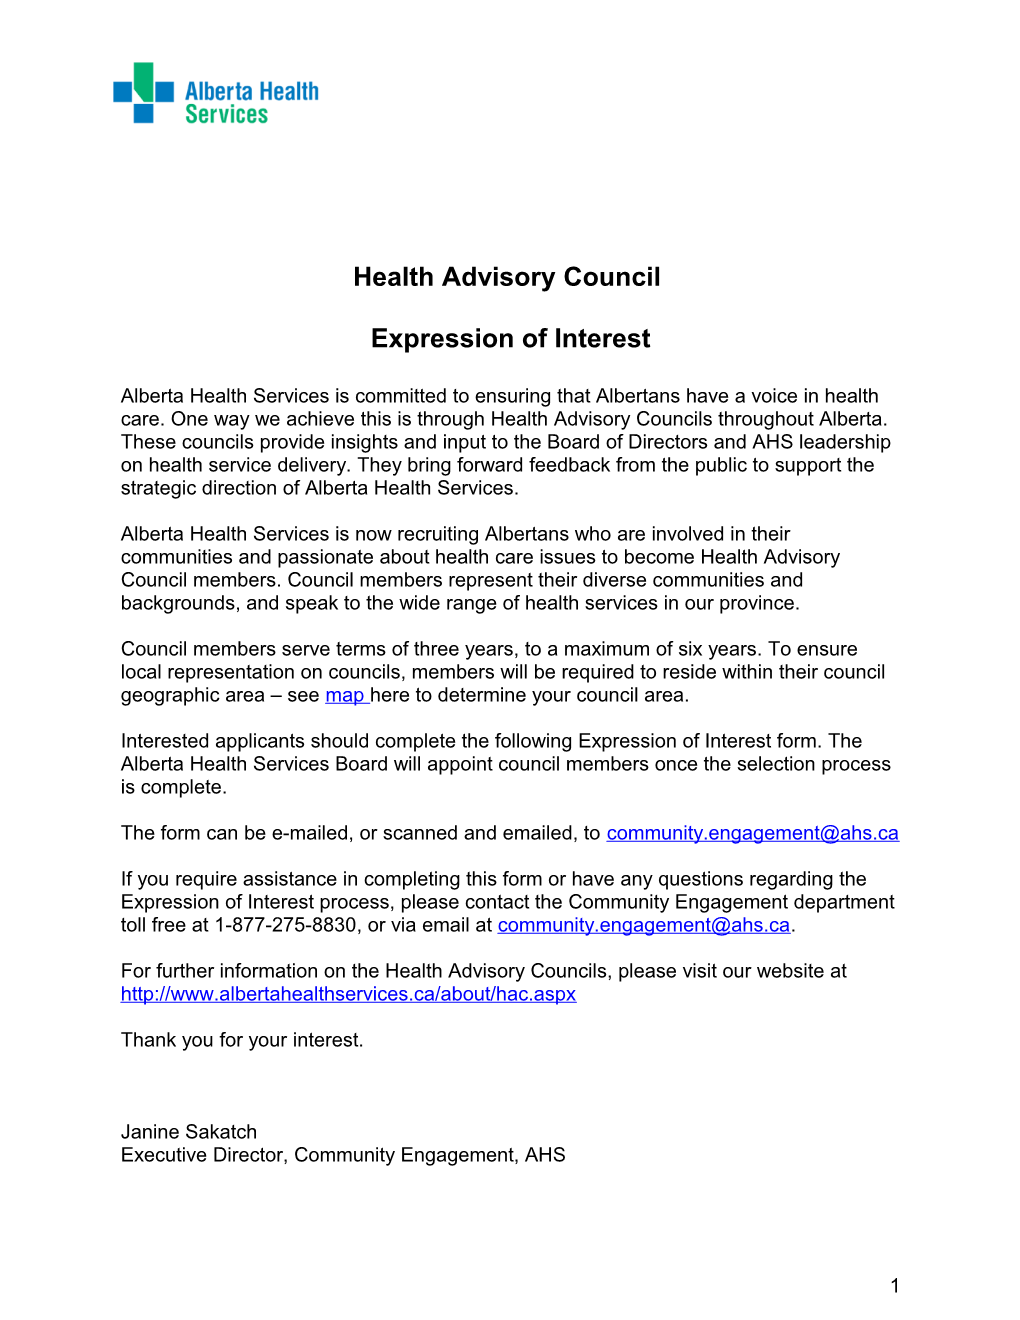 Health Advisory Council Expression of Interest Form